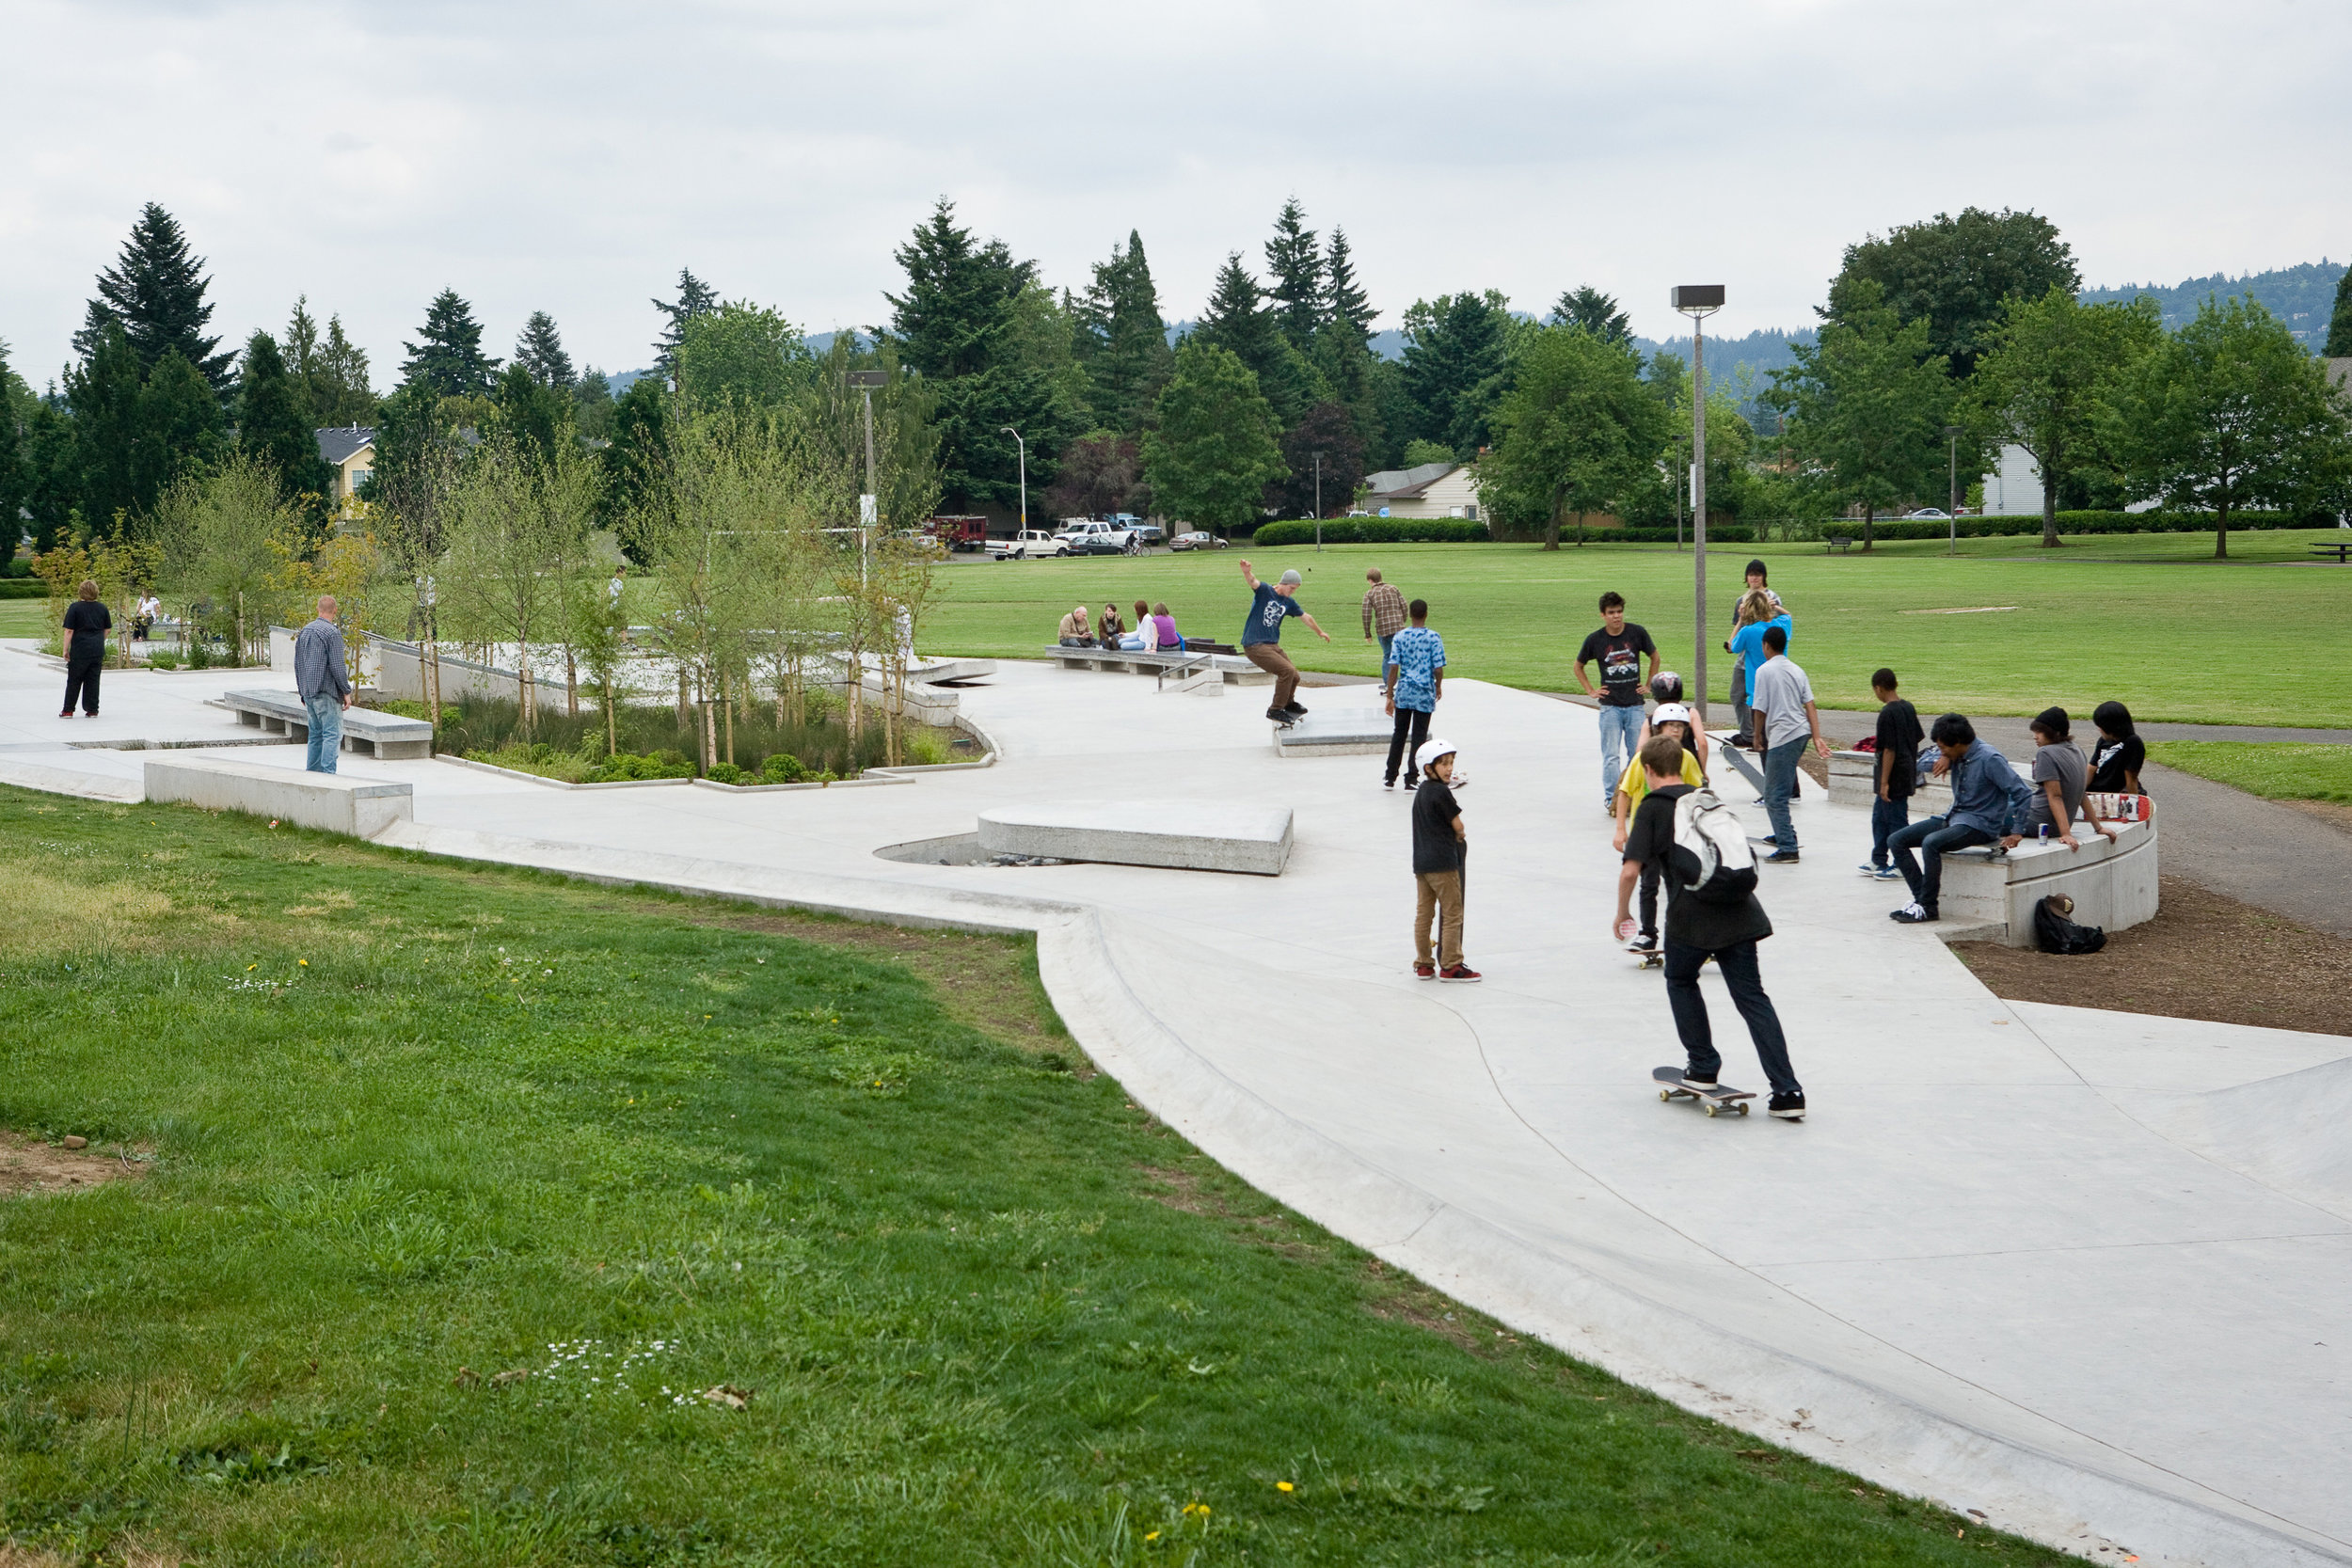  Ed Benedict Skate Plaza offers plenty of ledge features and challenging urban terrain for Portland’s street skating community. 